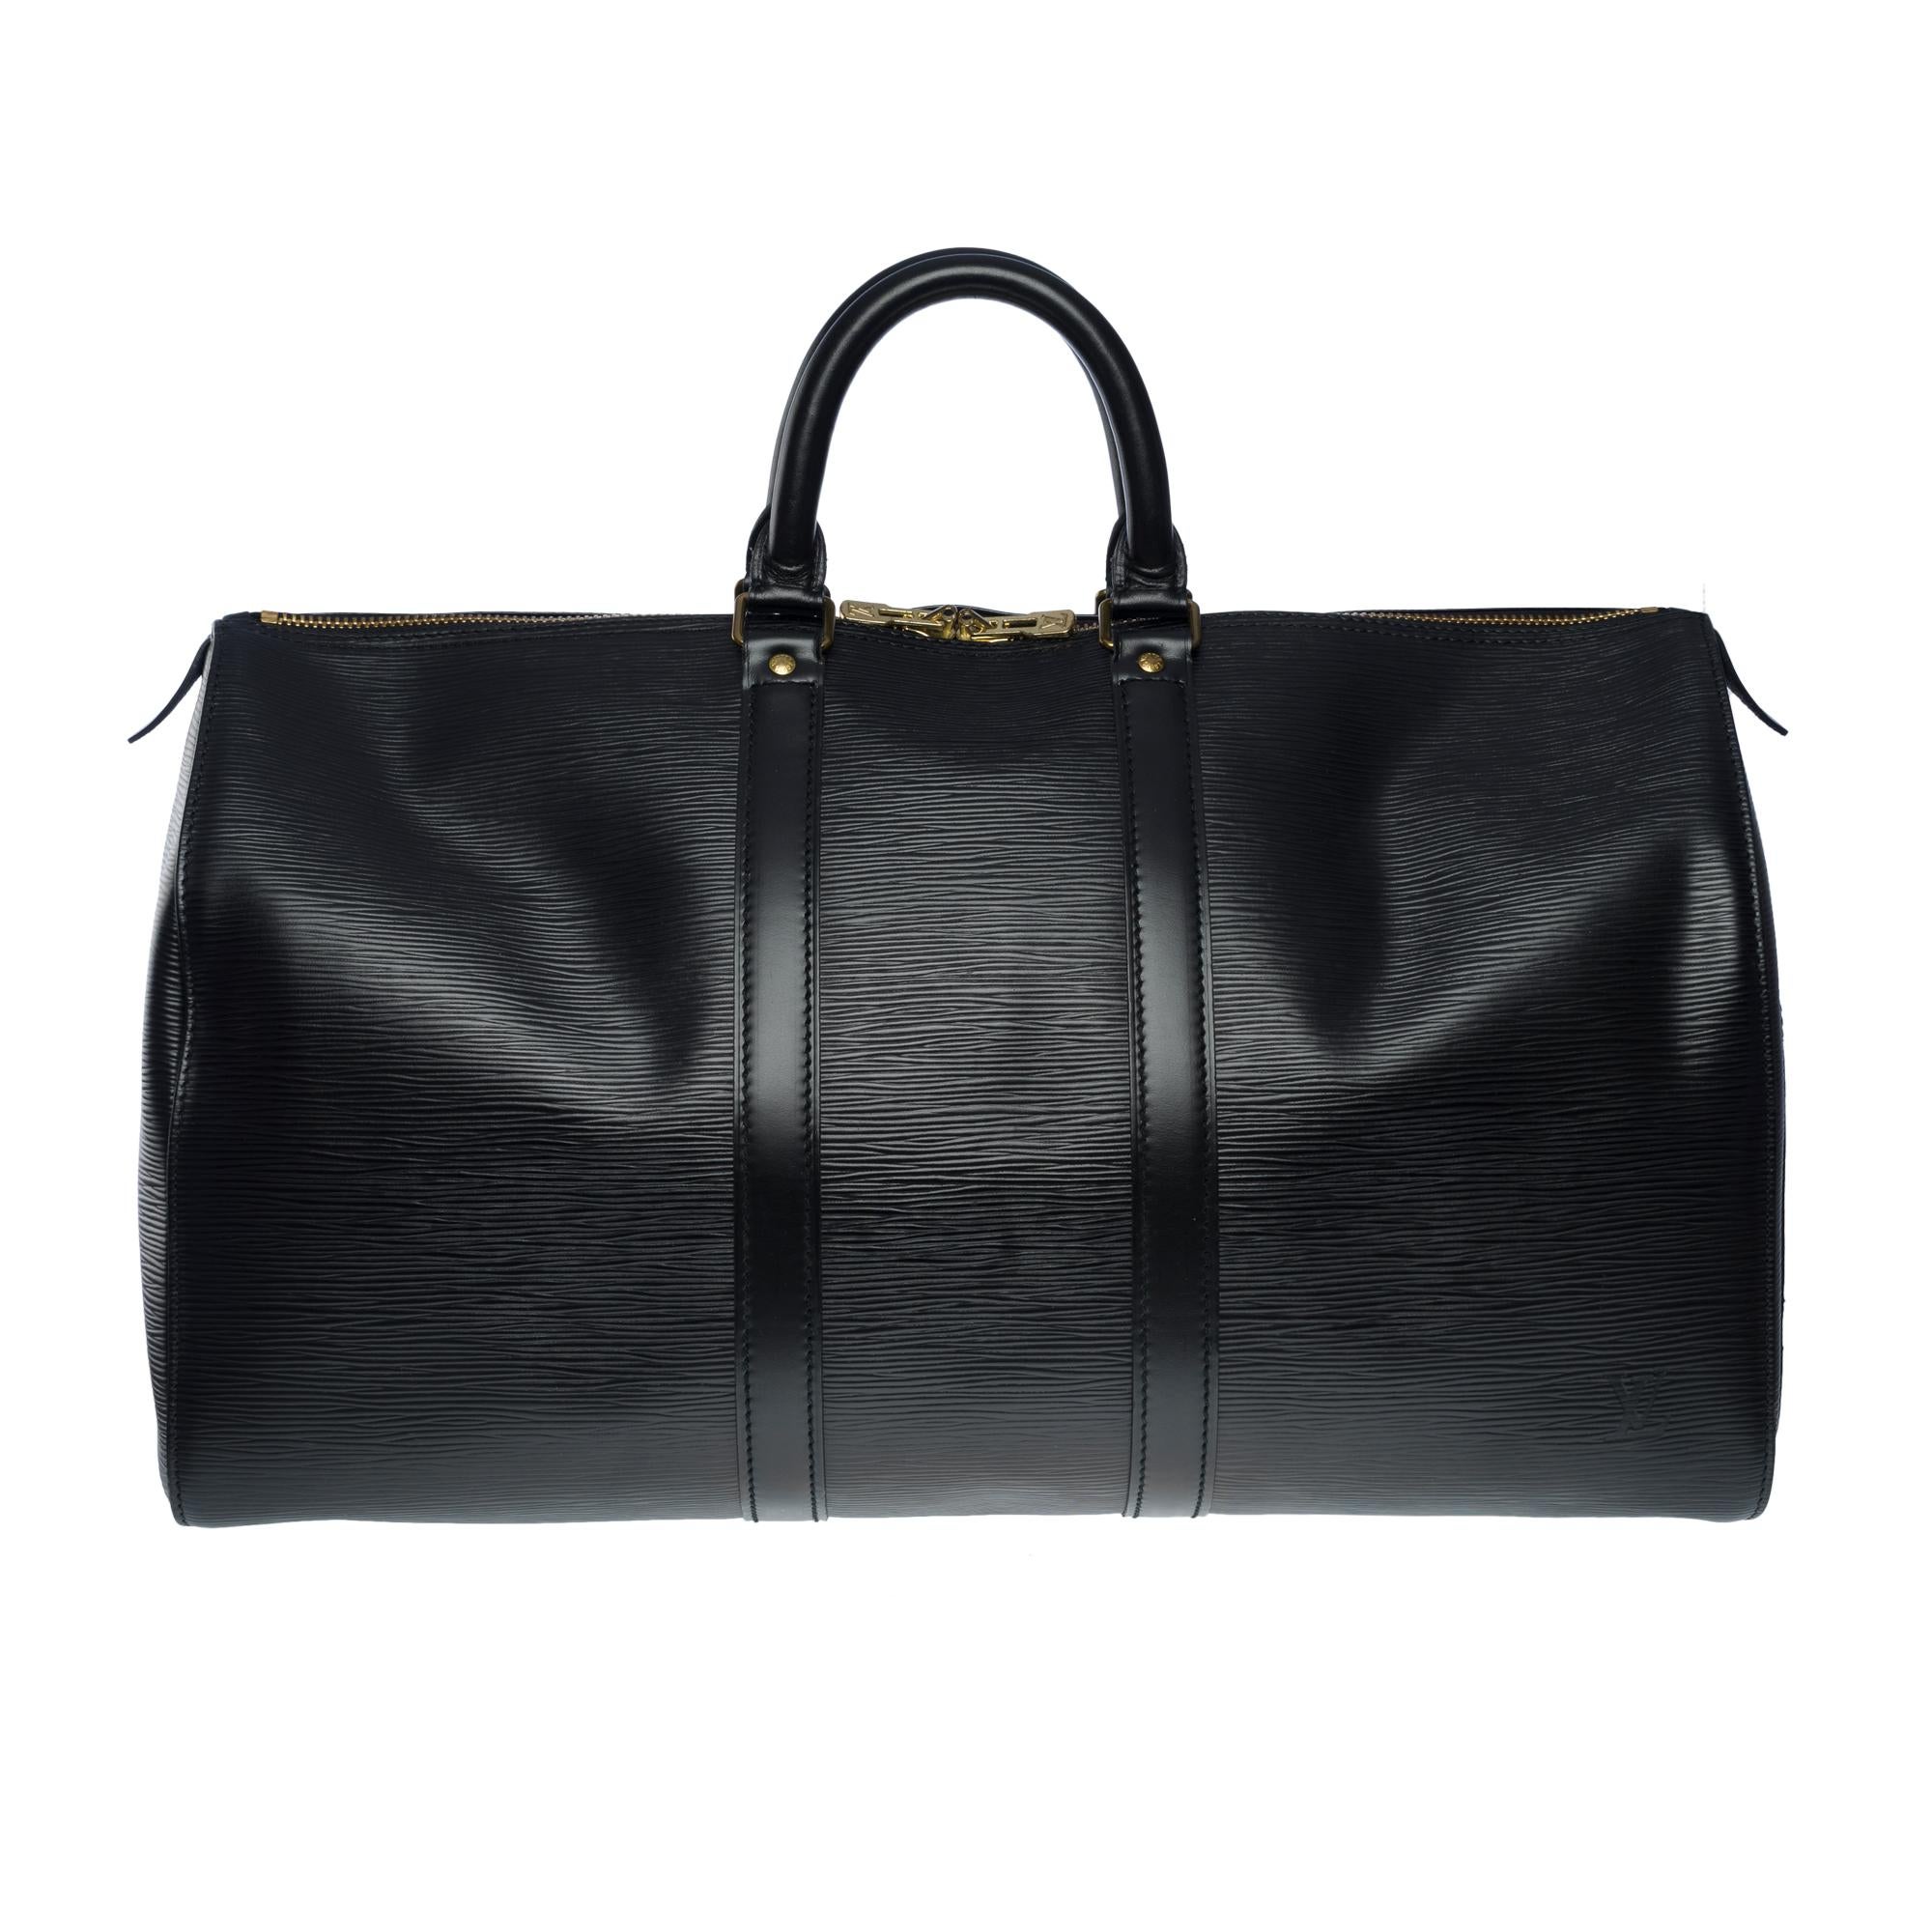 The very Chic Louis Vuitton Keepall travel bag 45 cm in black epi leather, double zipper sliders, double black leather handle allowing a hand carry
Zip closure
A left side outer patch pocket
Black suede inner lining
Signature “LOUIS VUITTON, Made in